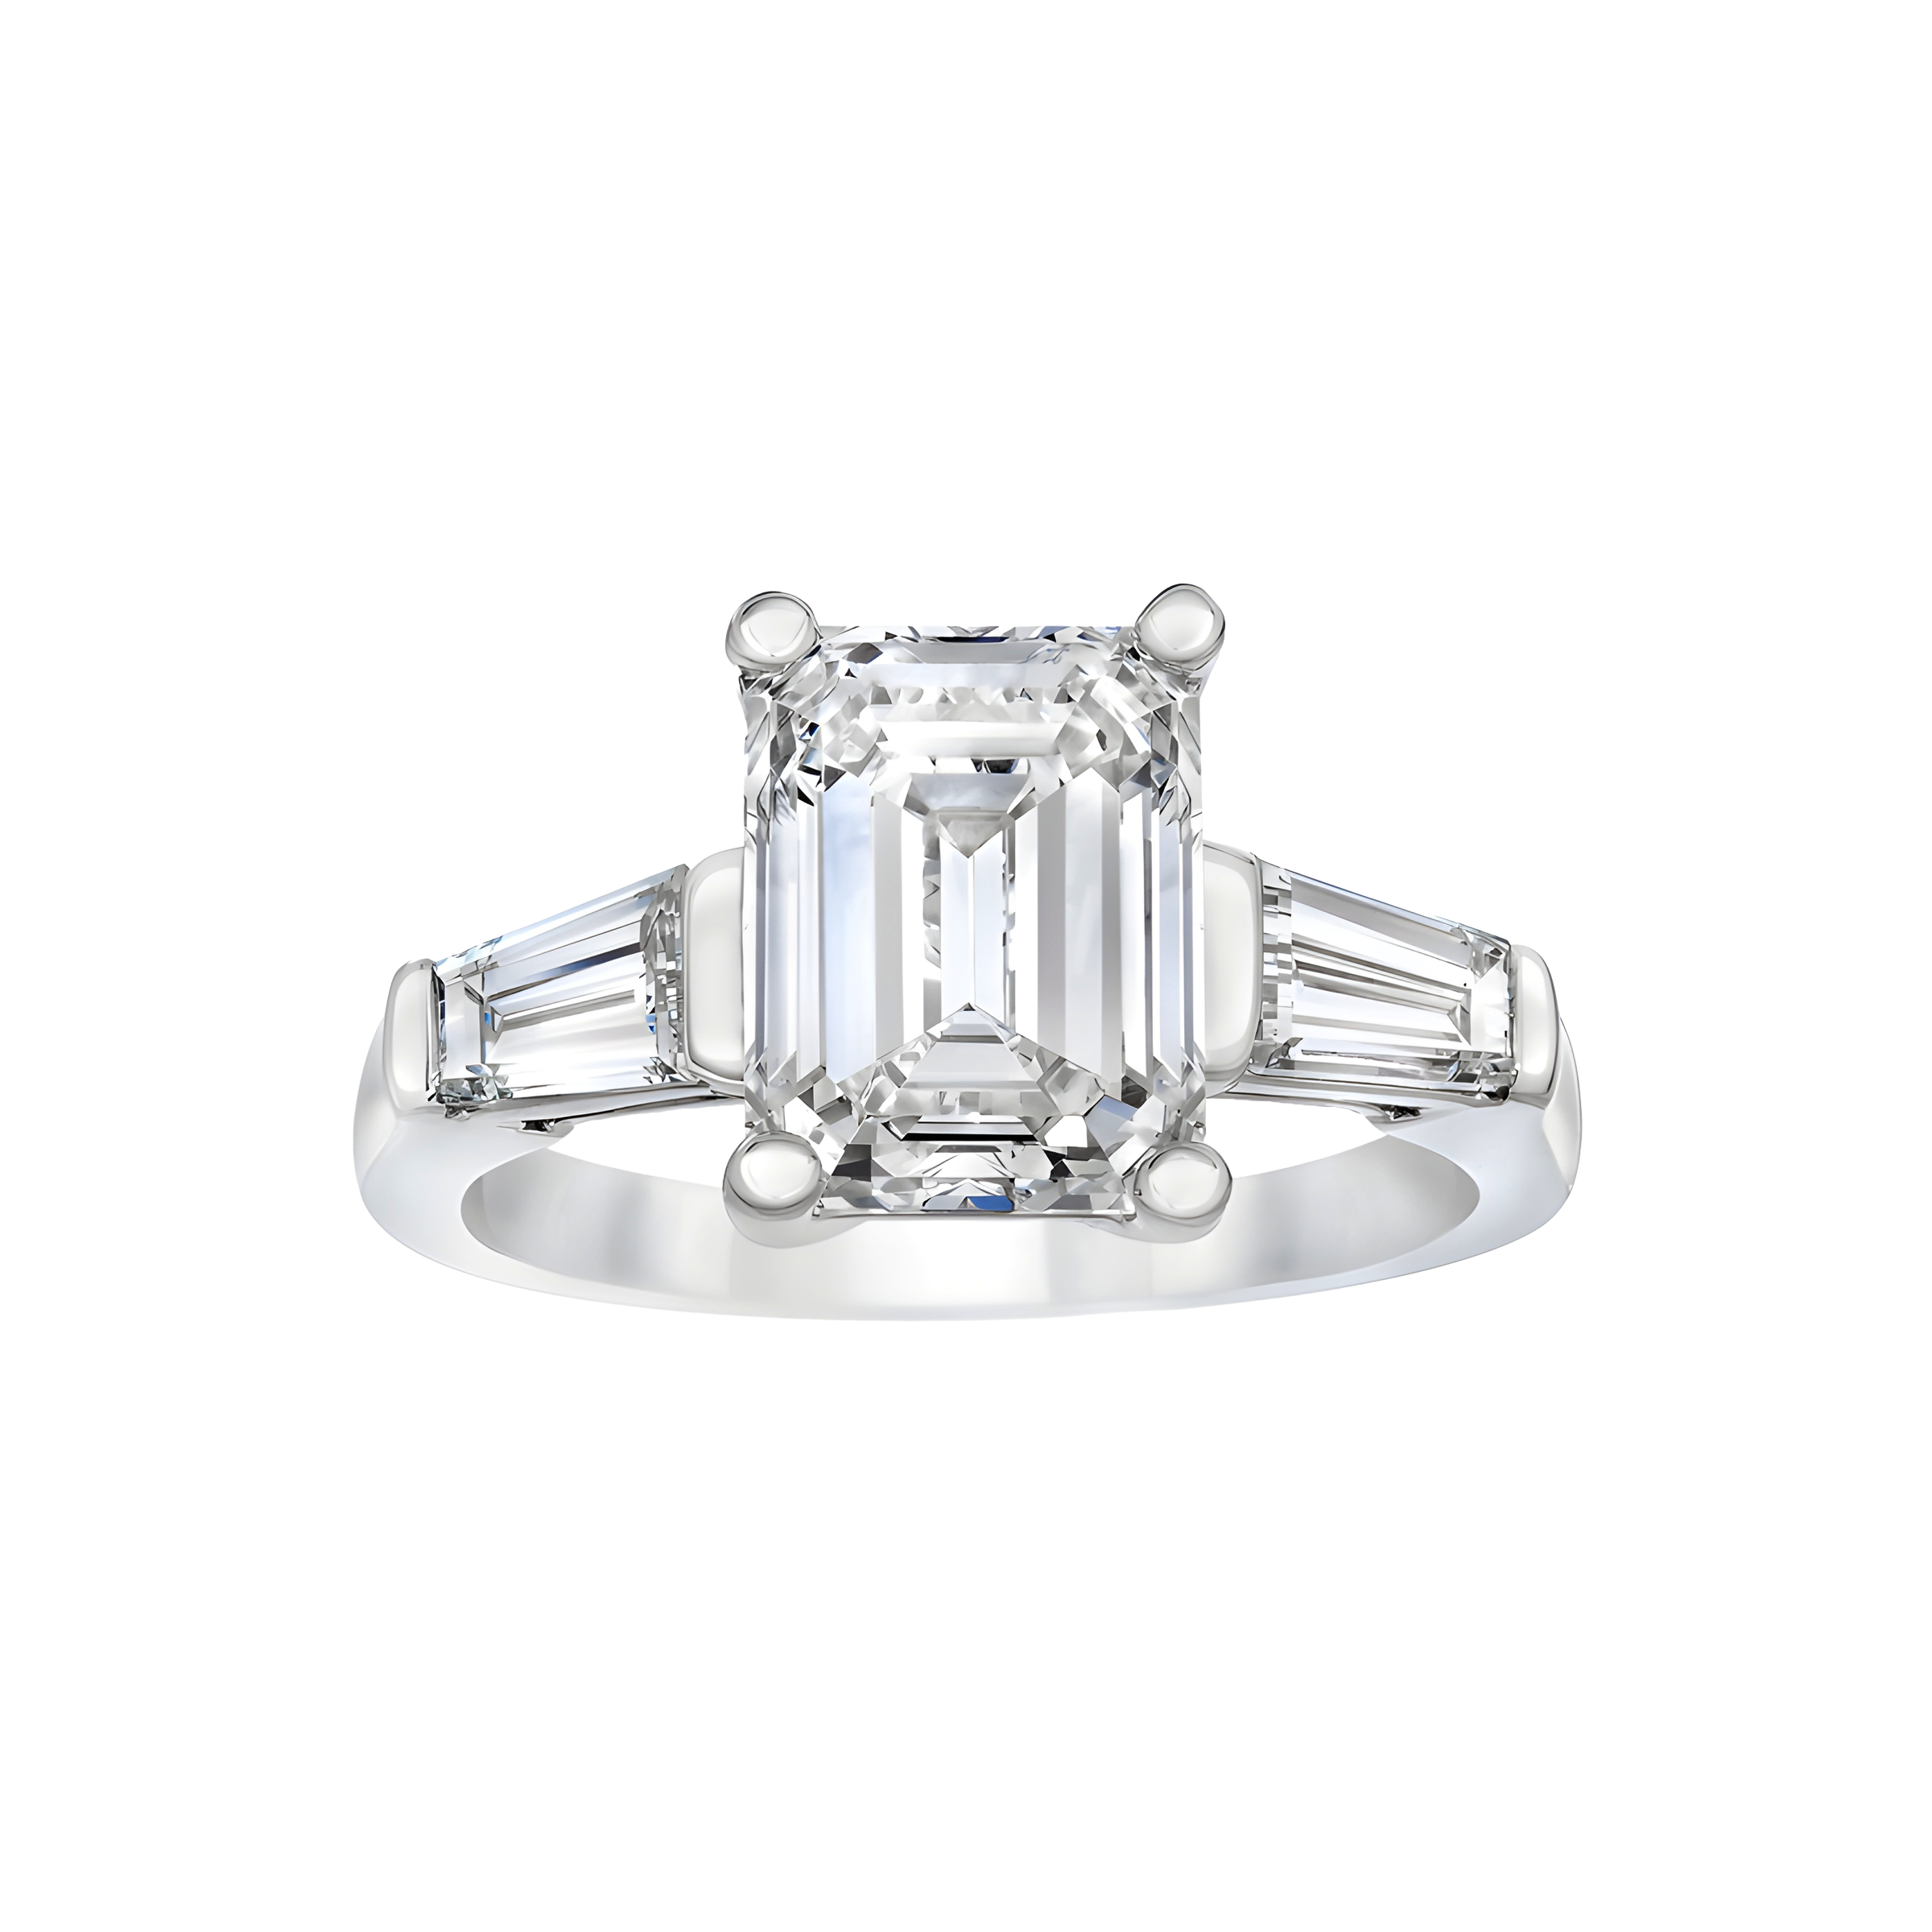 Emerald Cut Diamond Ring with Tapered Baguette Side Stones in Platinum